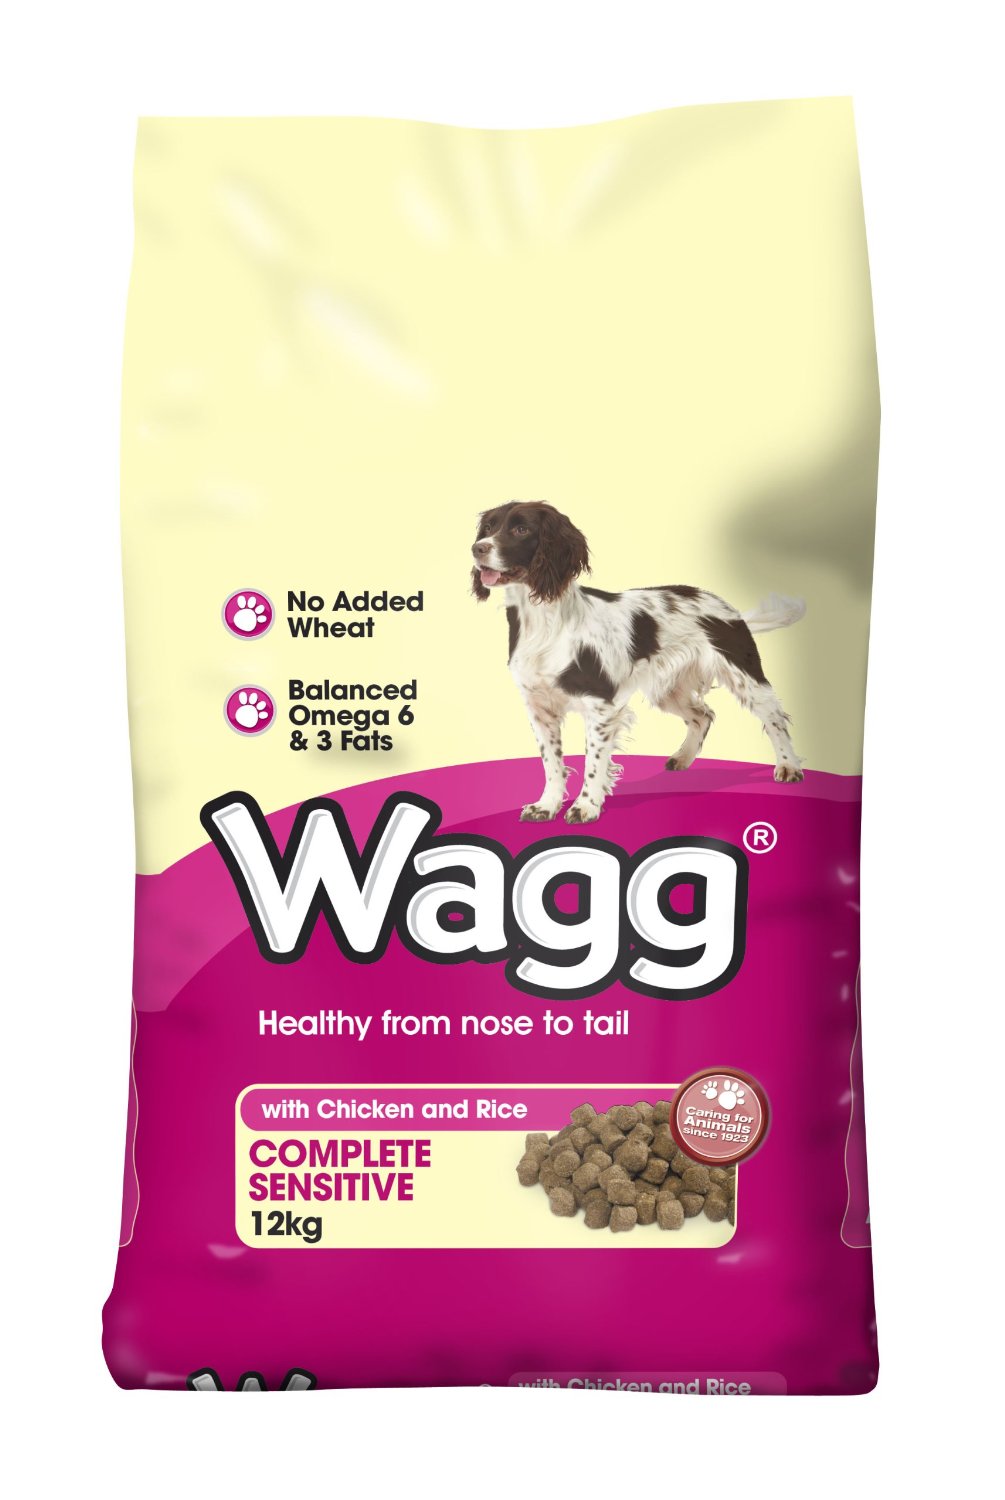 Wagg Complete Sensitive Gluten Free Dry Dog Food